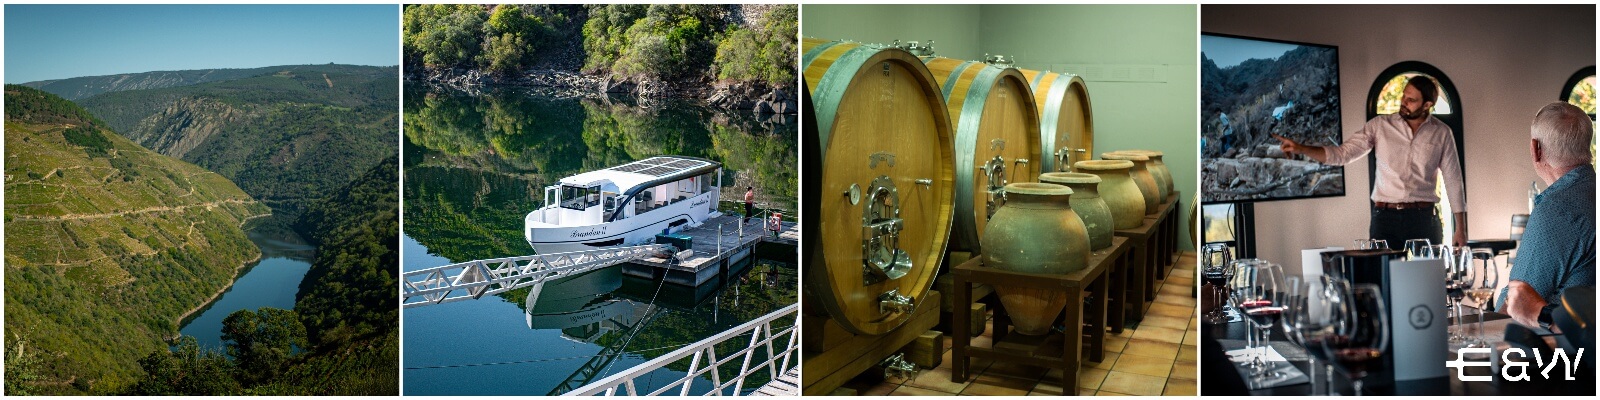 What to do in Galicia? Our top plans - Wine tours in Ribeira Sacra